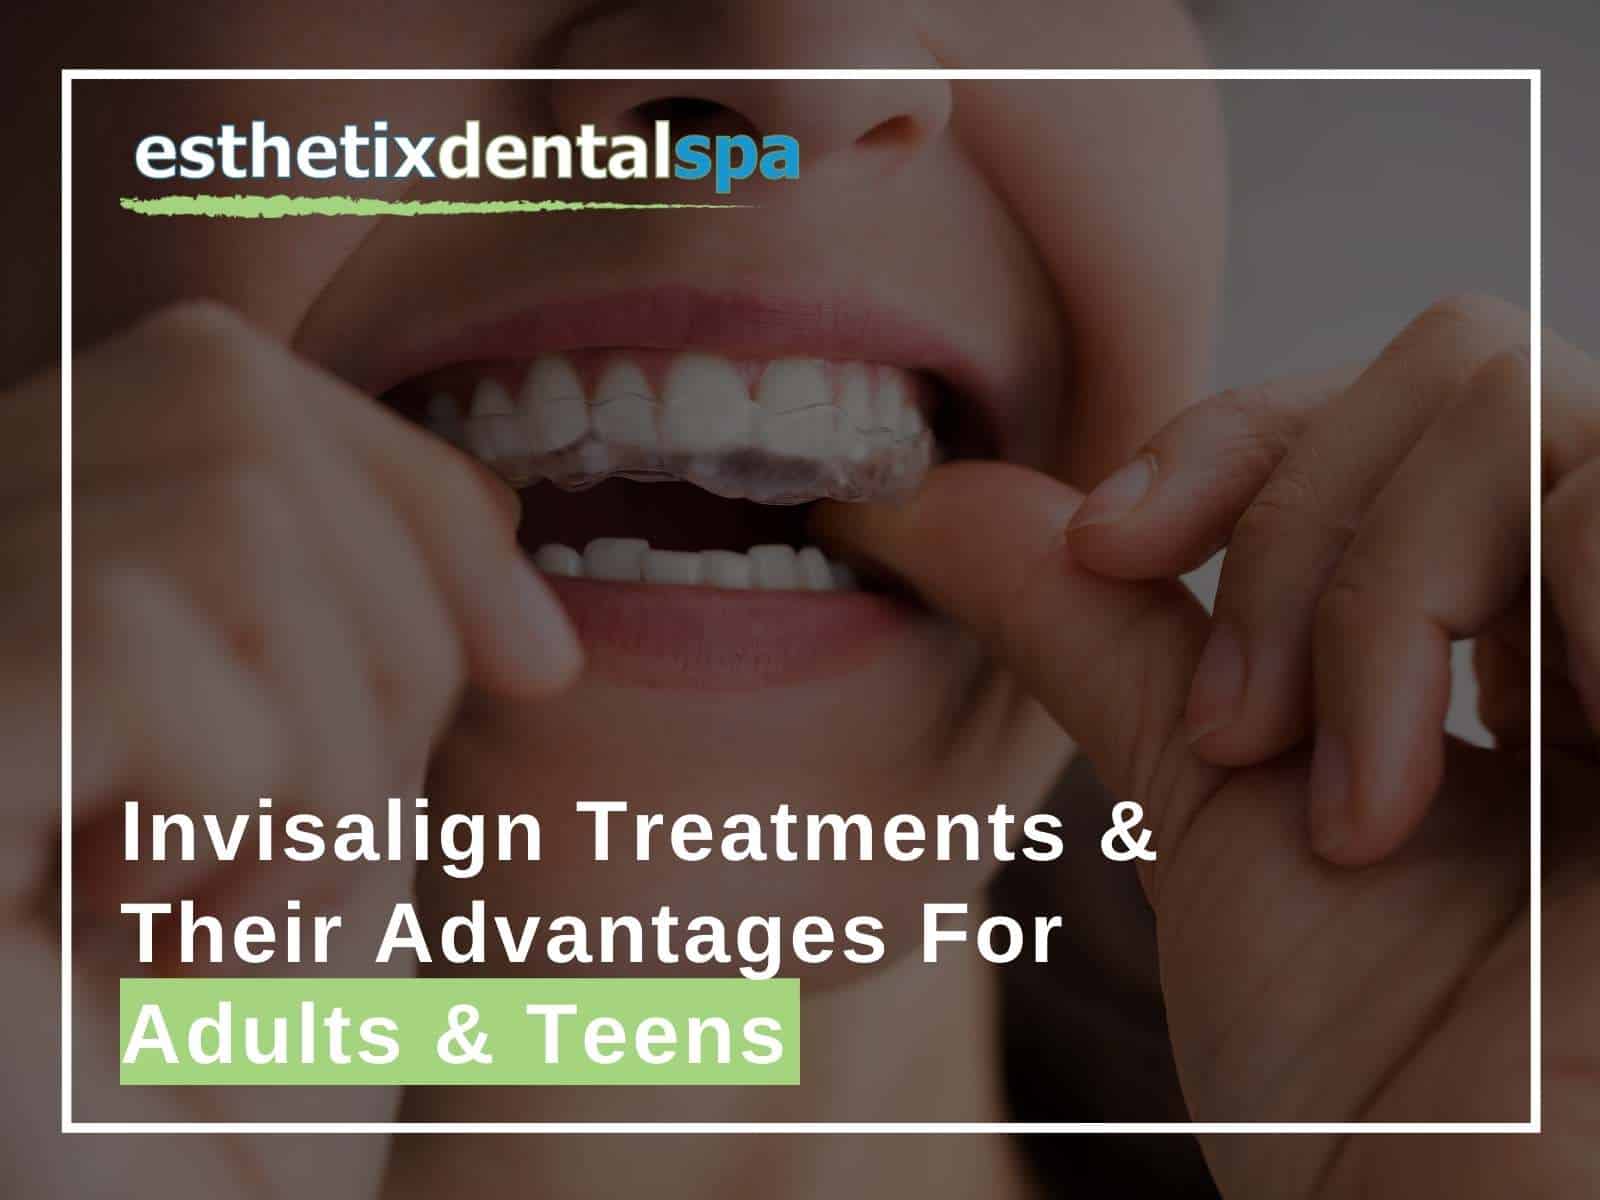 Invisalign Treatments & Their Advantages For Adults & Teens